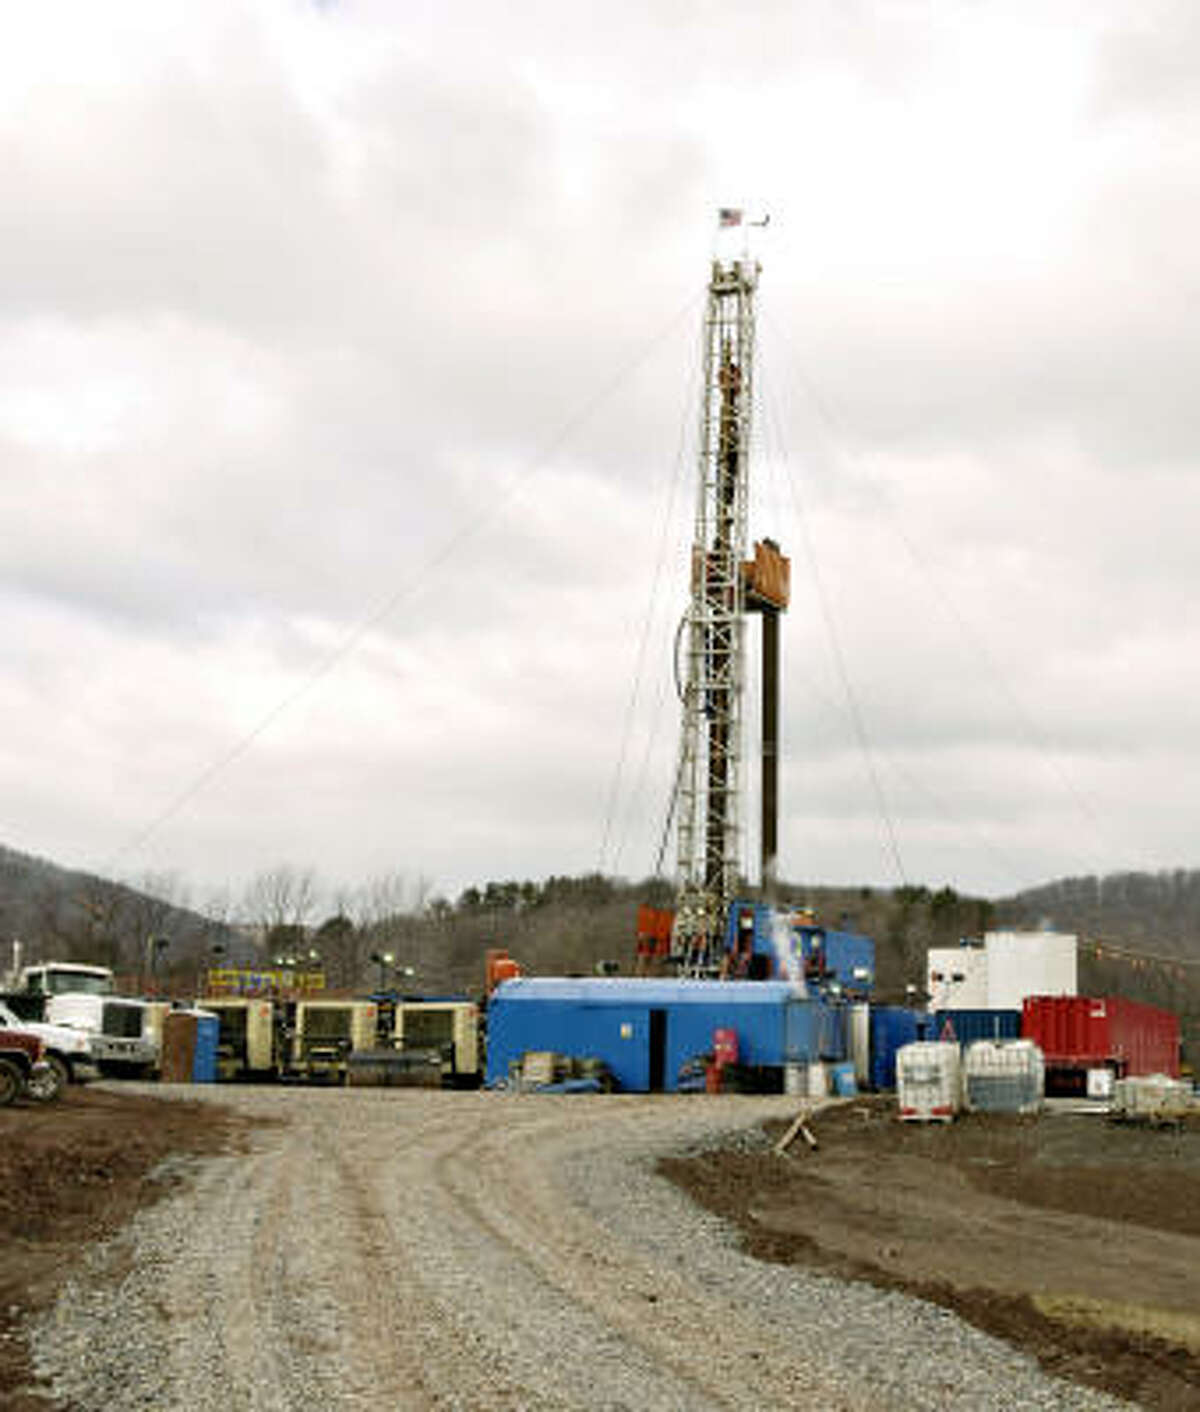 A natural gas rig stands in Mifflin Township, Pa., illustrating the fuel’s rise in the state where the first commercially successful oil well was drilled.